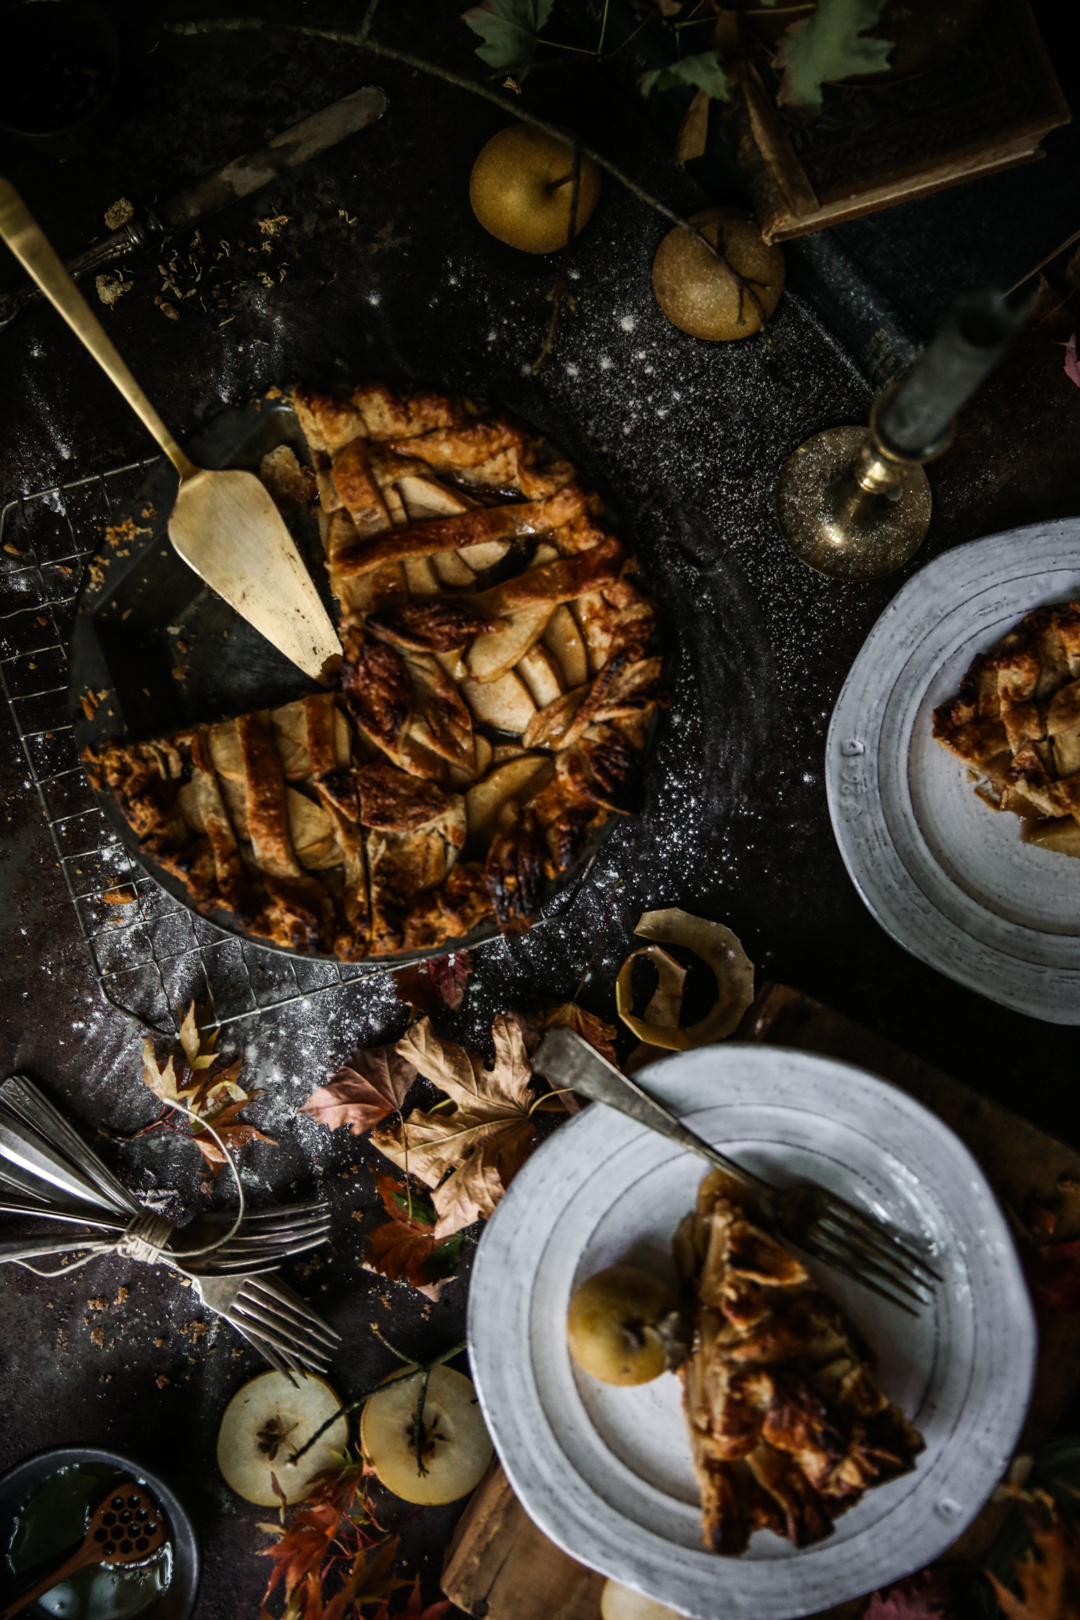 apple-bourbon-pie-photography-recipe-and-styling-by-christiann-koepke-of-christiannkoepke-com-16